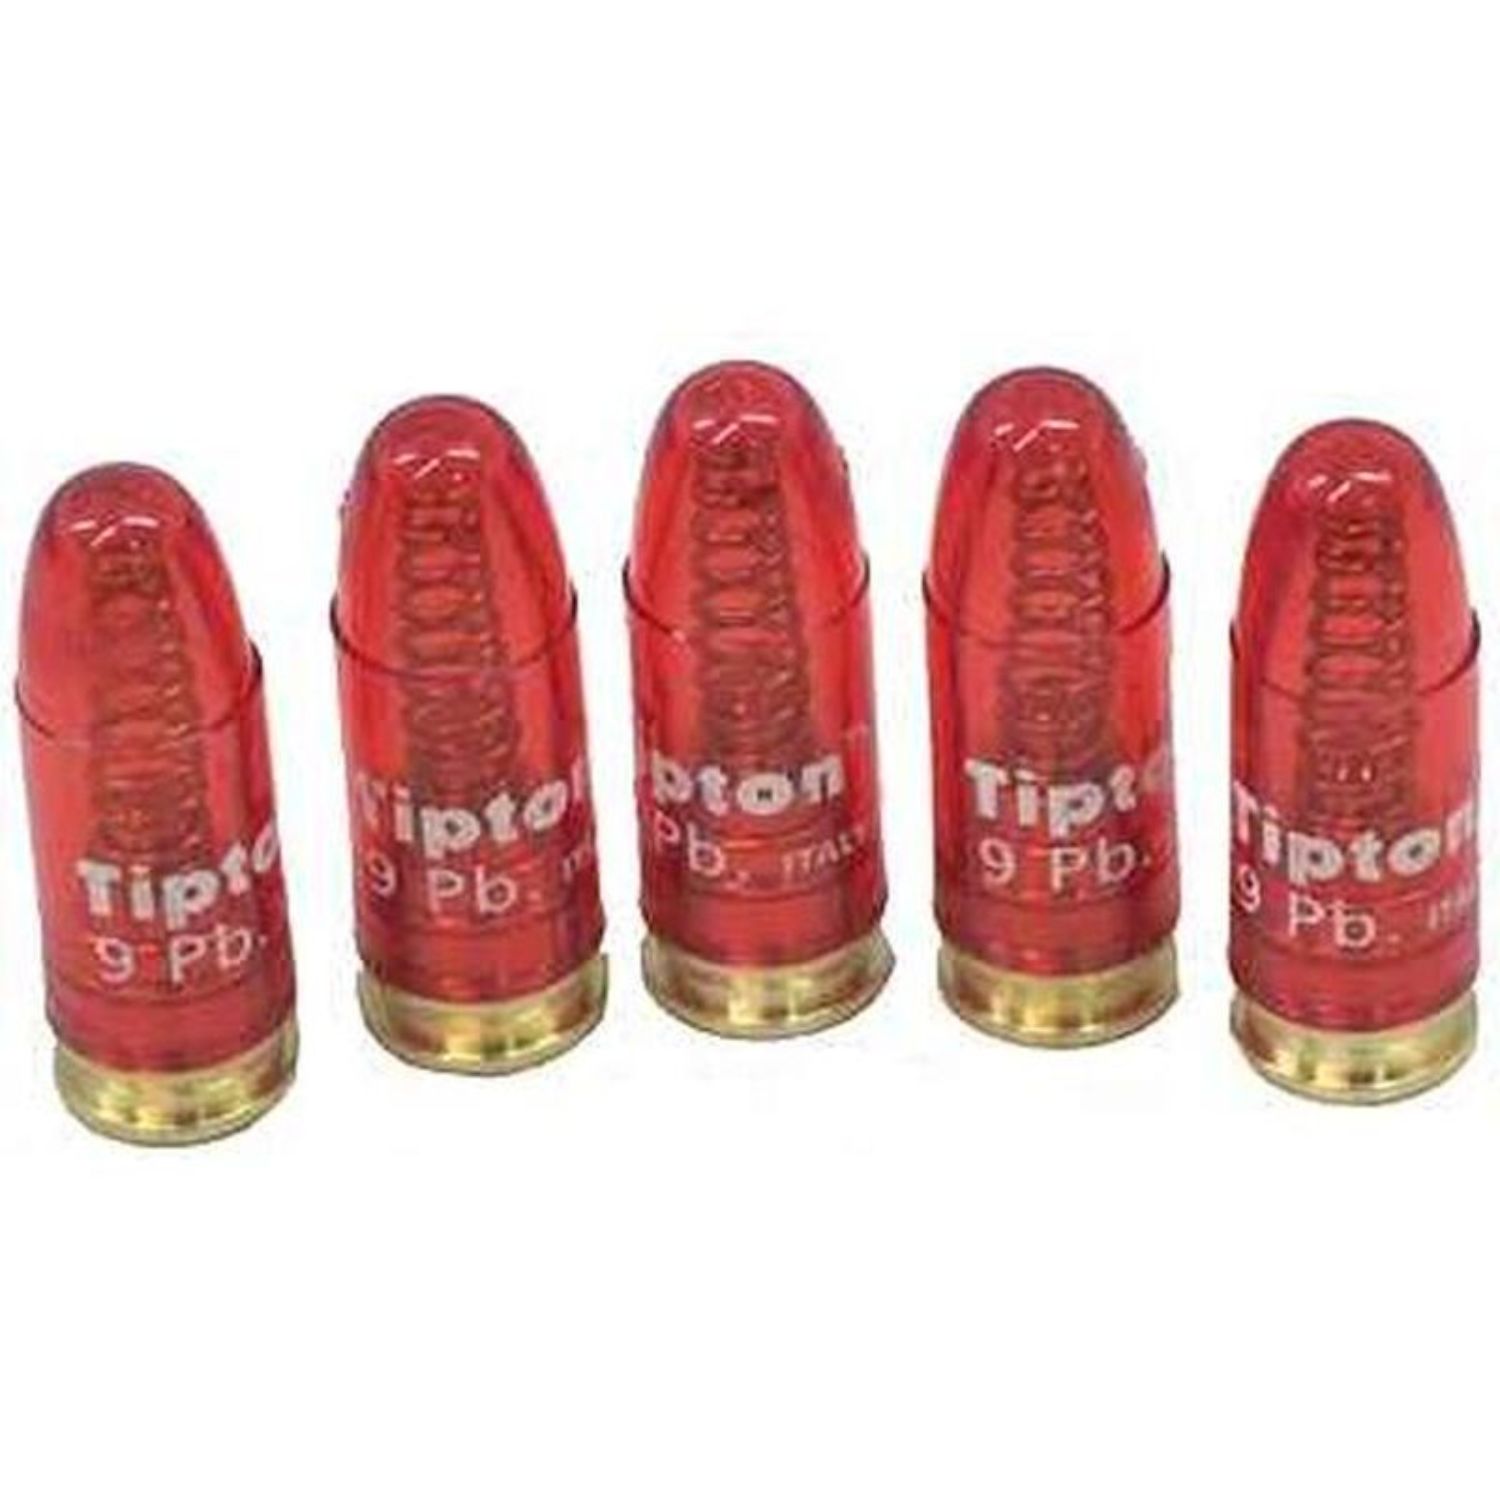 TIPTON SNAP CAPS 9MM LUGER 5-PACK